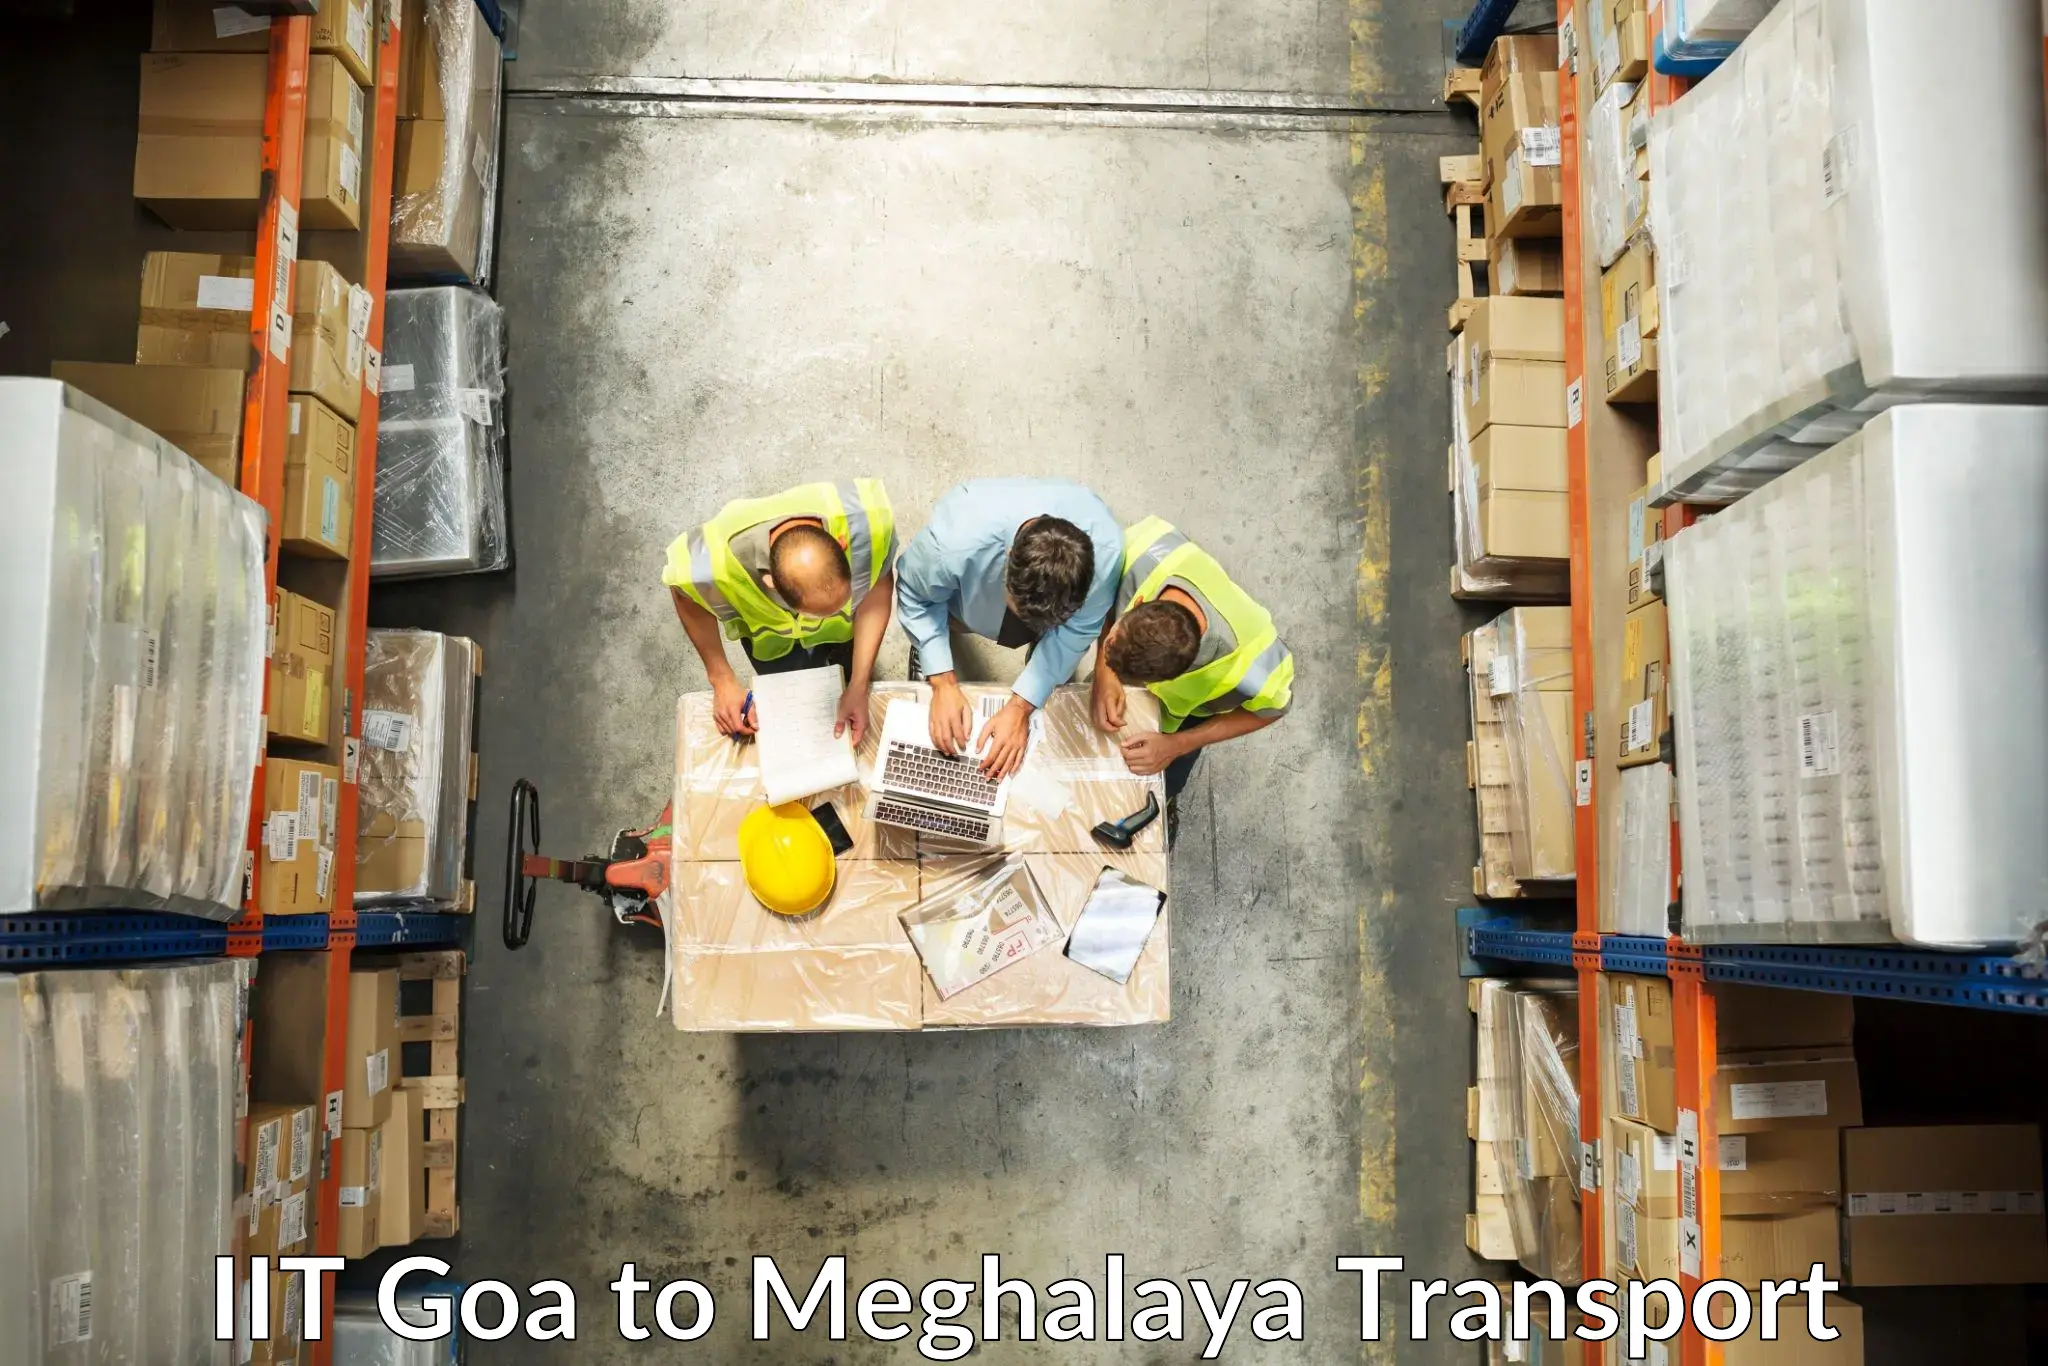 Express transport services IIT Goa to Tura